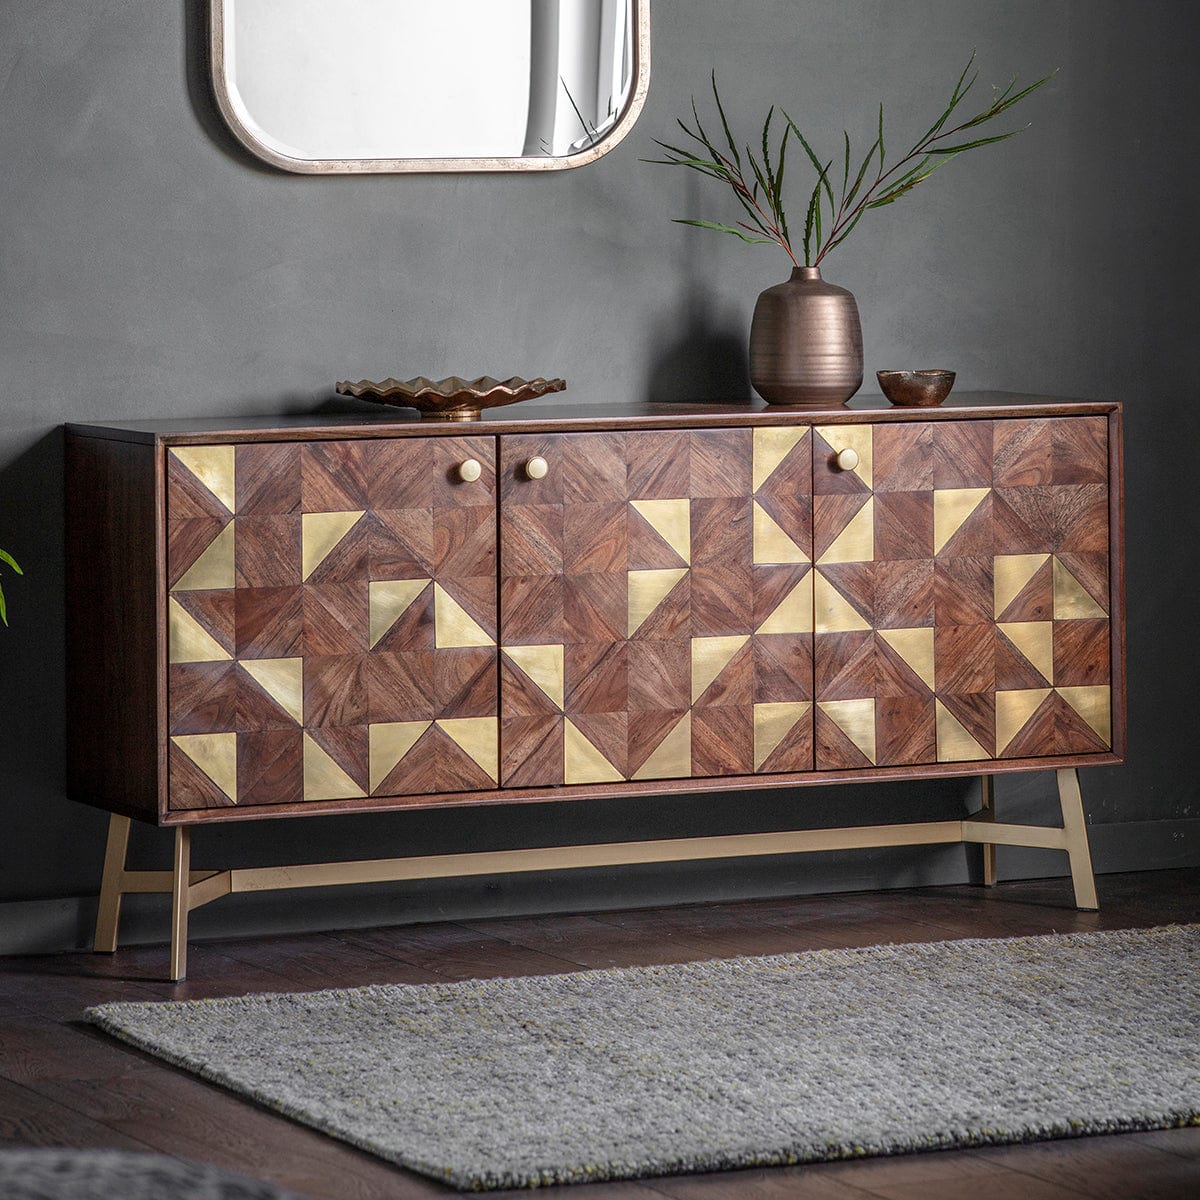 Clift 3 Door Sideboard in acacia wood with brass inlaid pattern | MalletandPlane.com